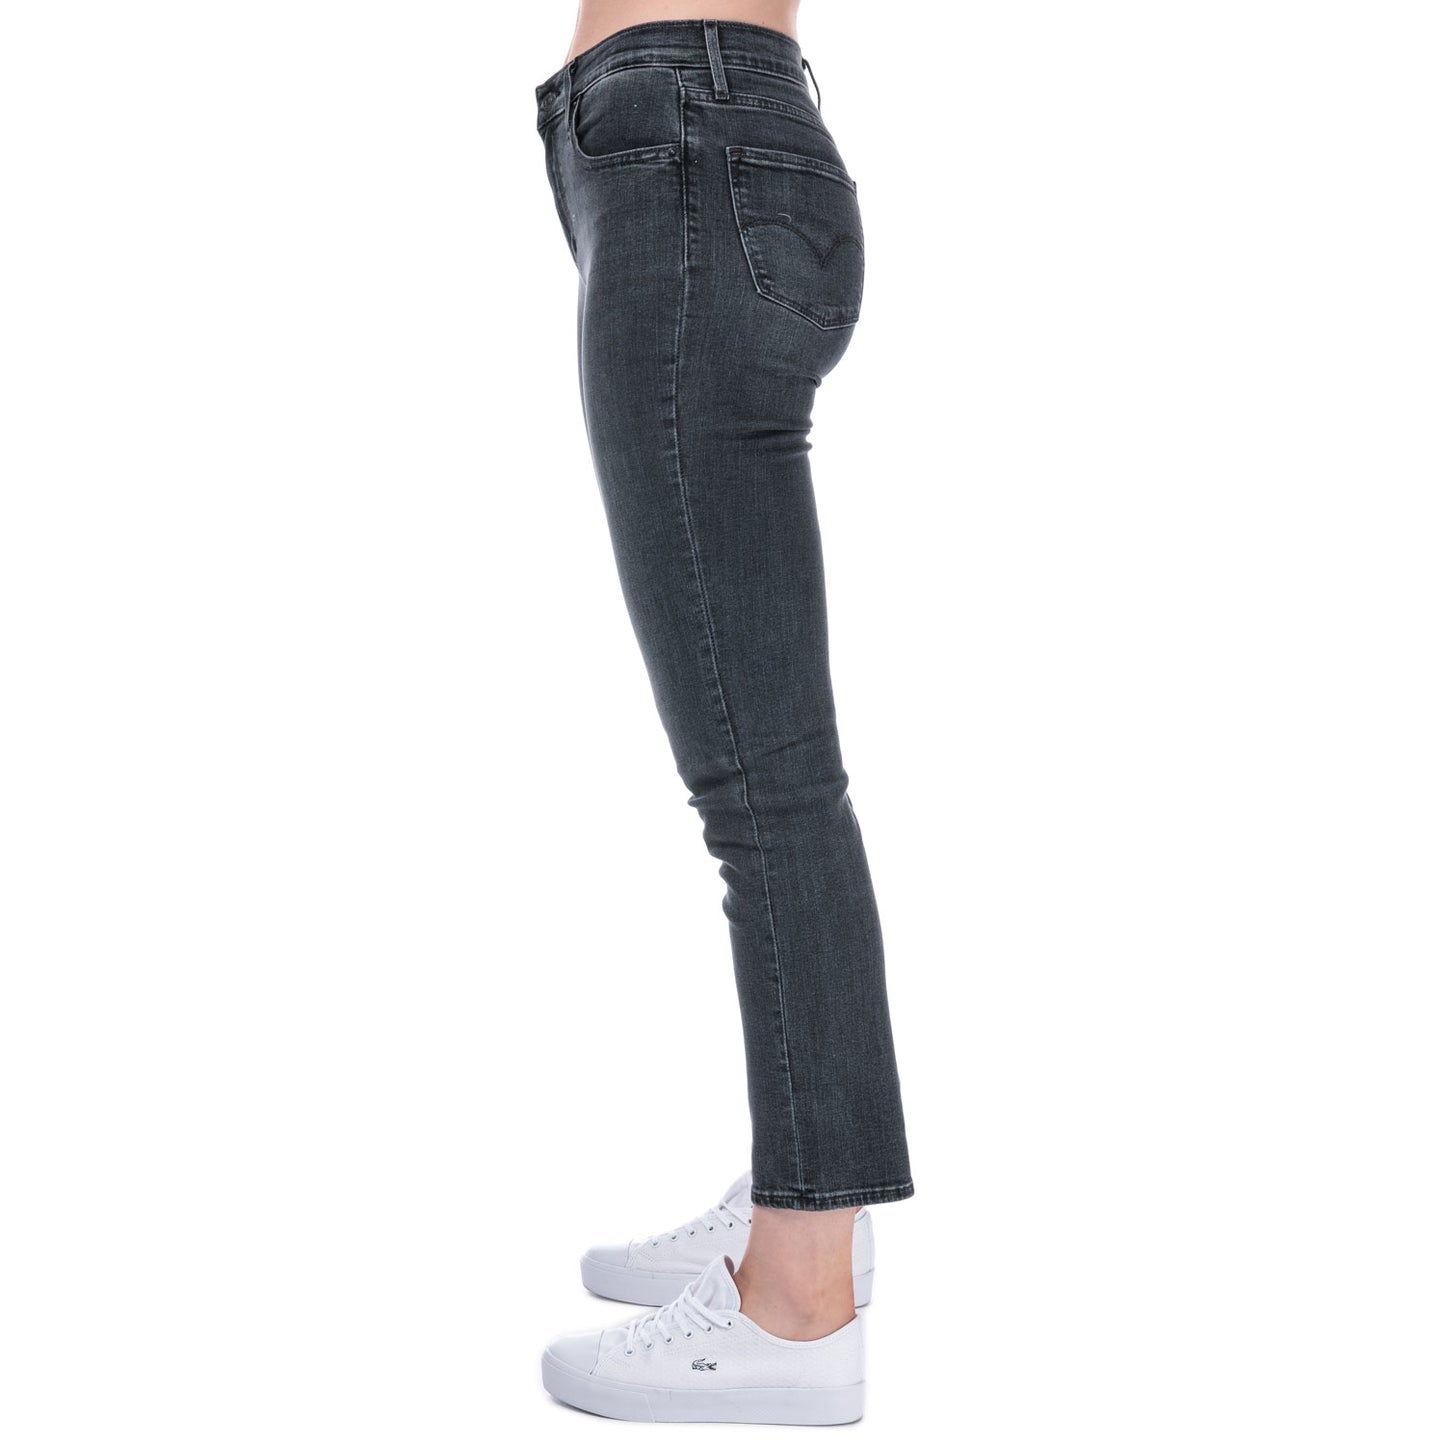 Levis-f-jeans 724 straight height